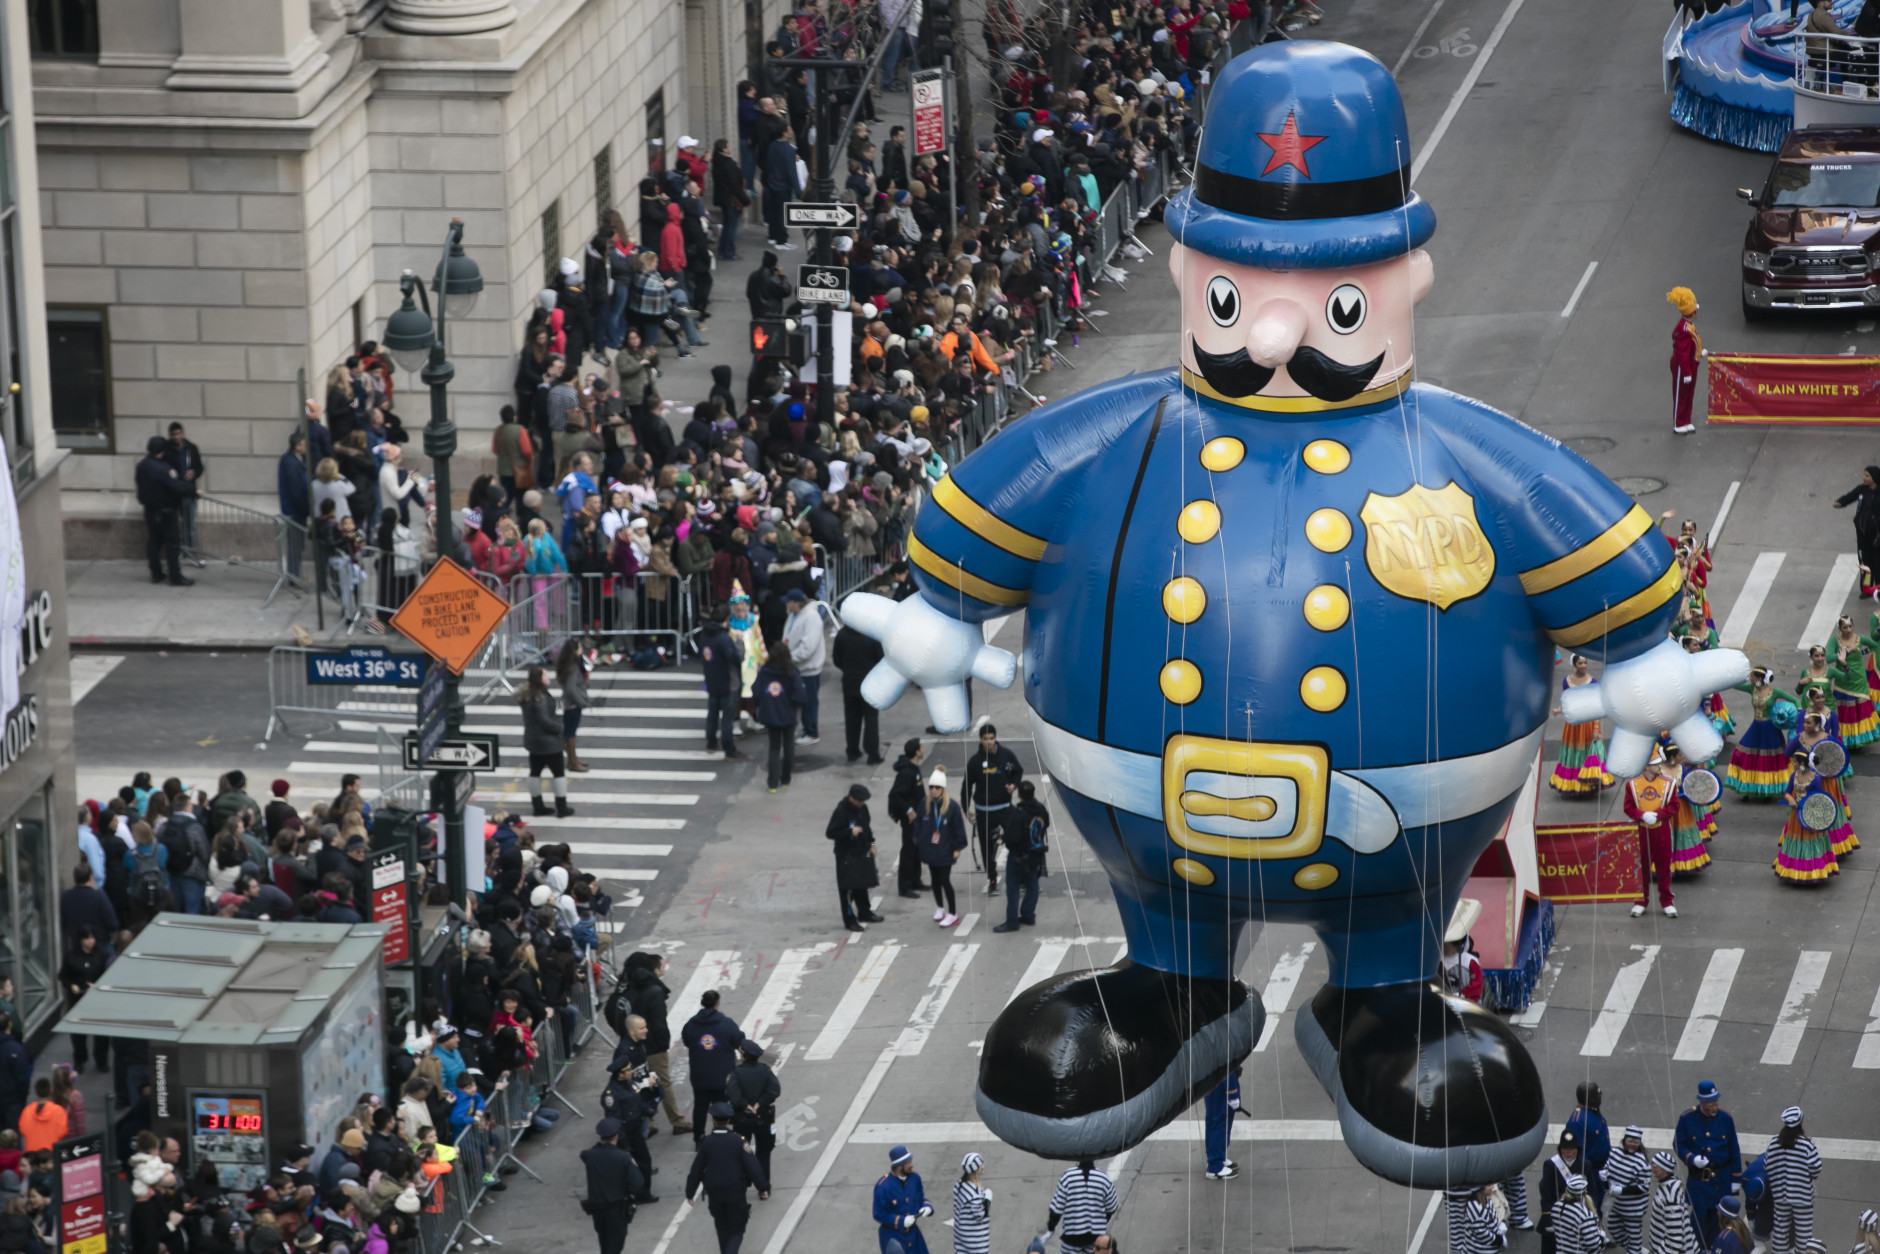 The Police Officer balloon goes down 6th Avenue for the 89th annual Macy's Thanksgiving Day Parade as seen from above street level on Thursday, Nov. 26, 2015, in New York. (Photo by Ben Hider/Invision/AP)